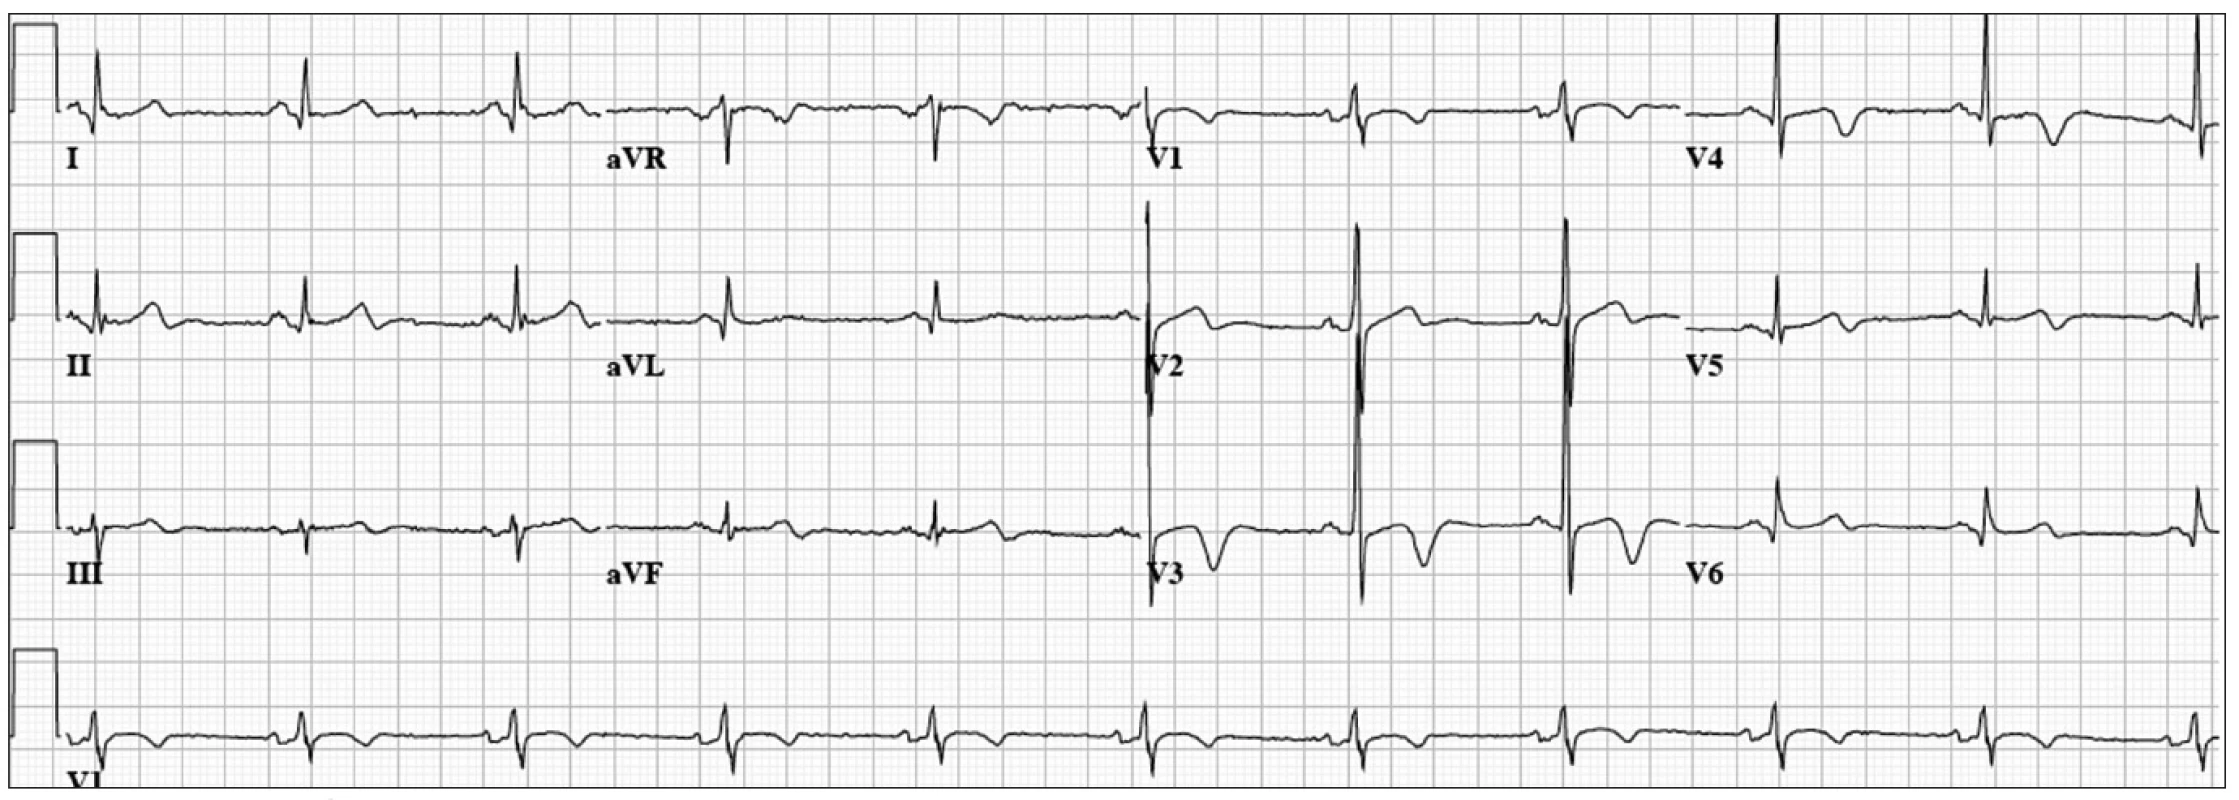 53 year old man with exertional chest pain.